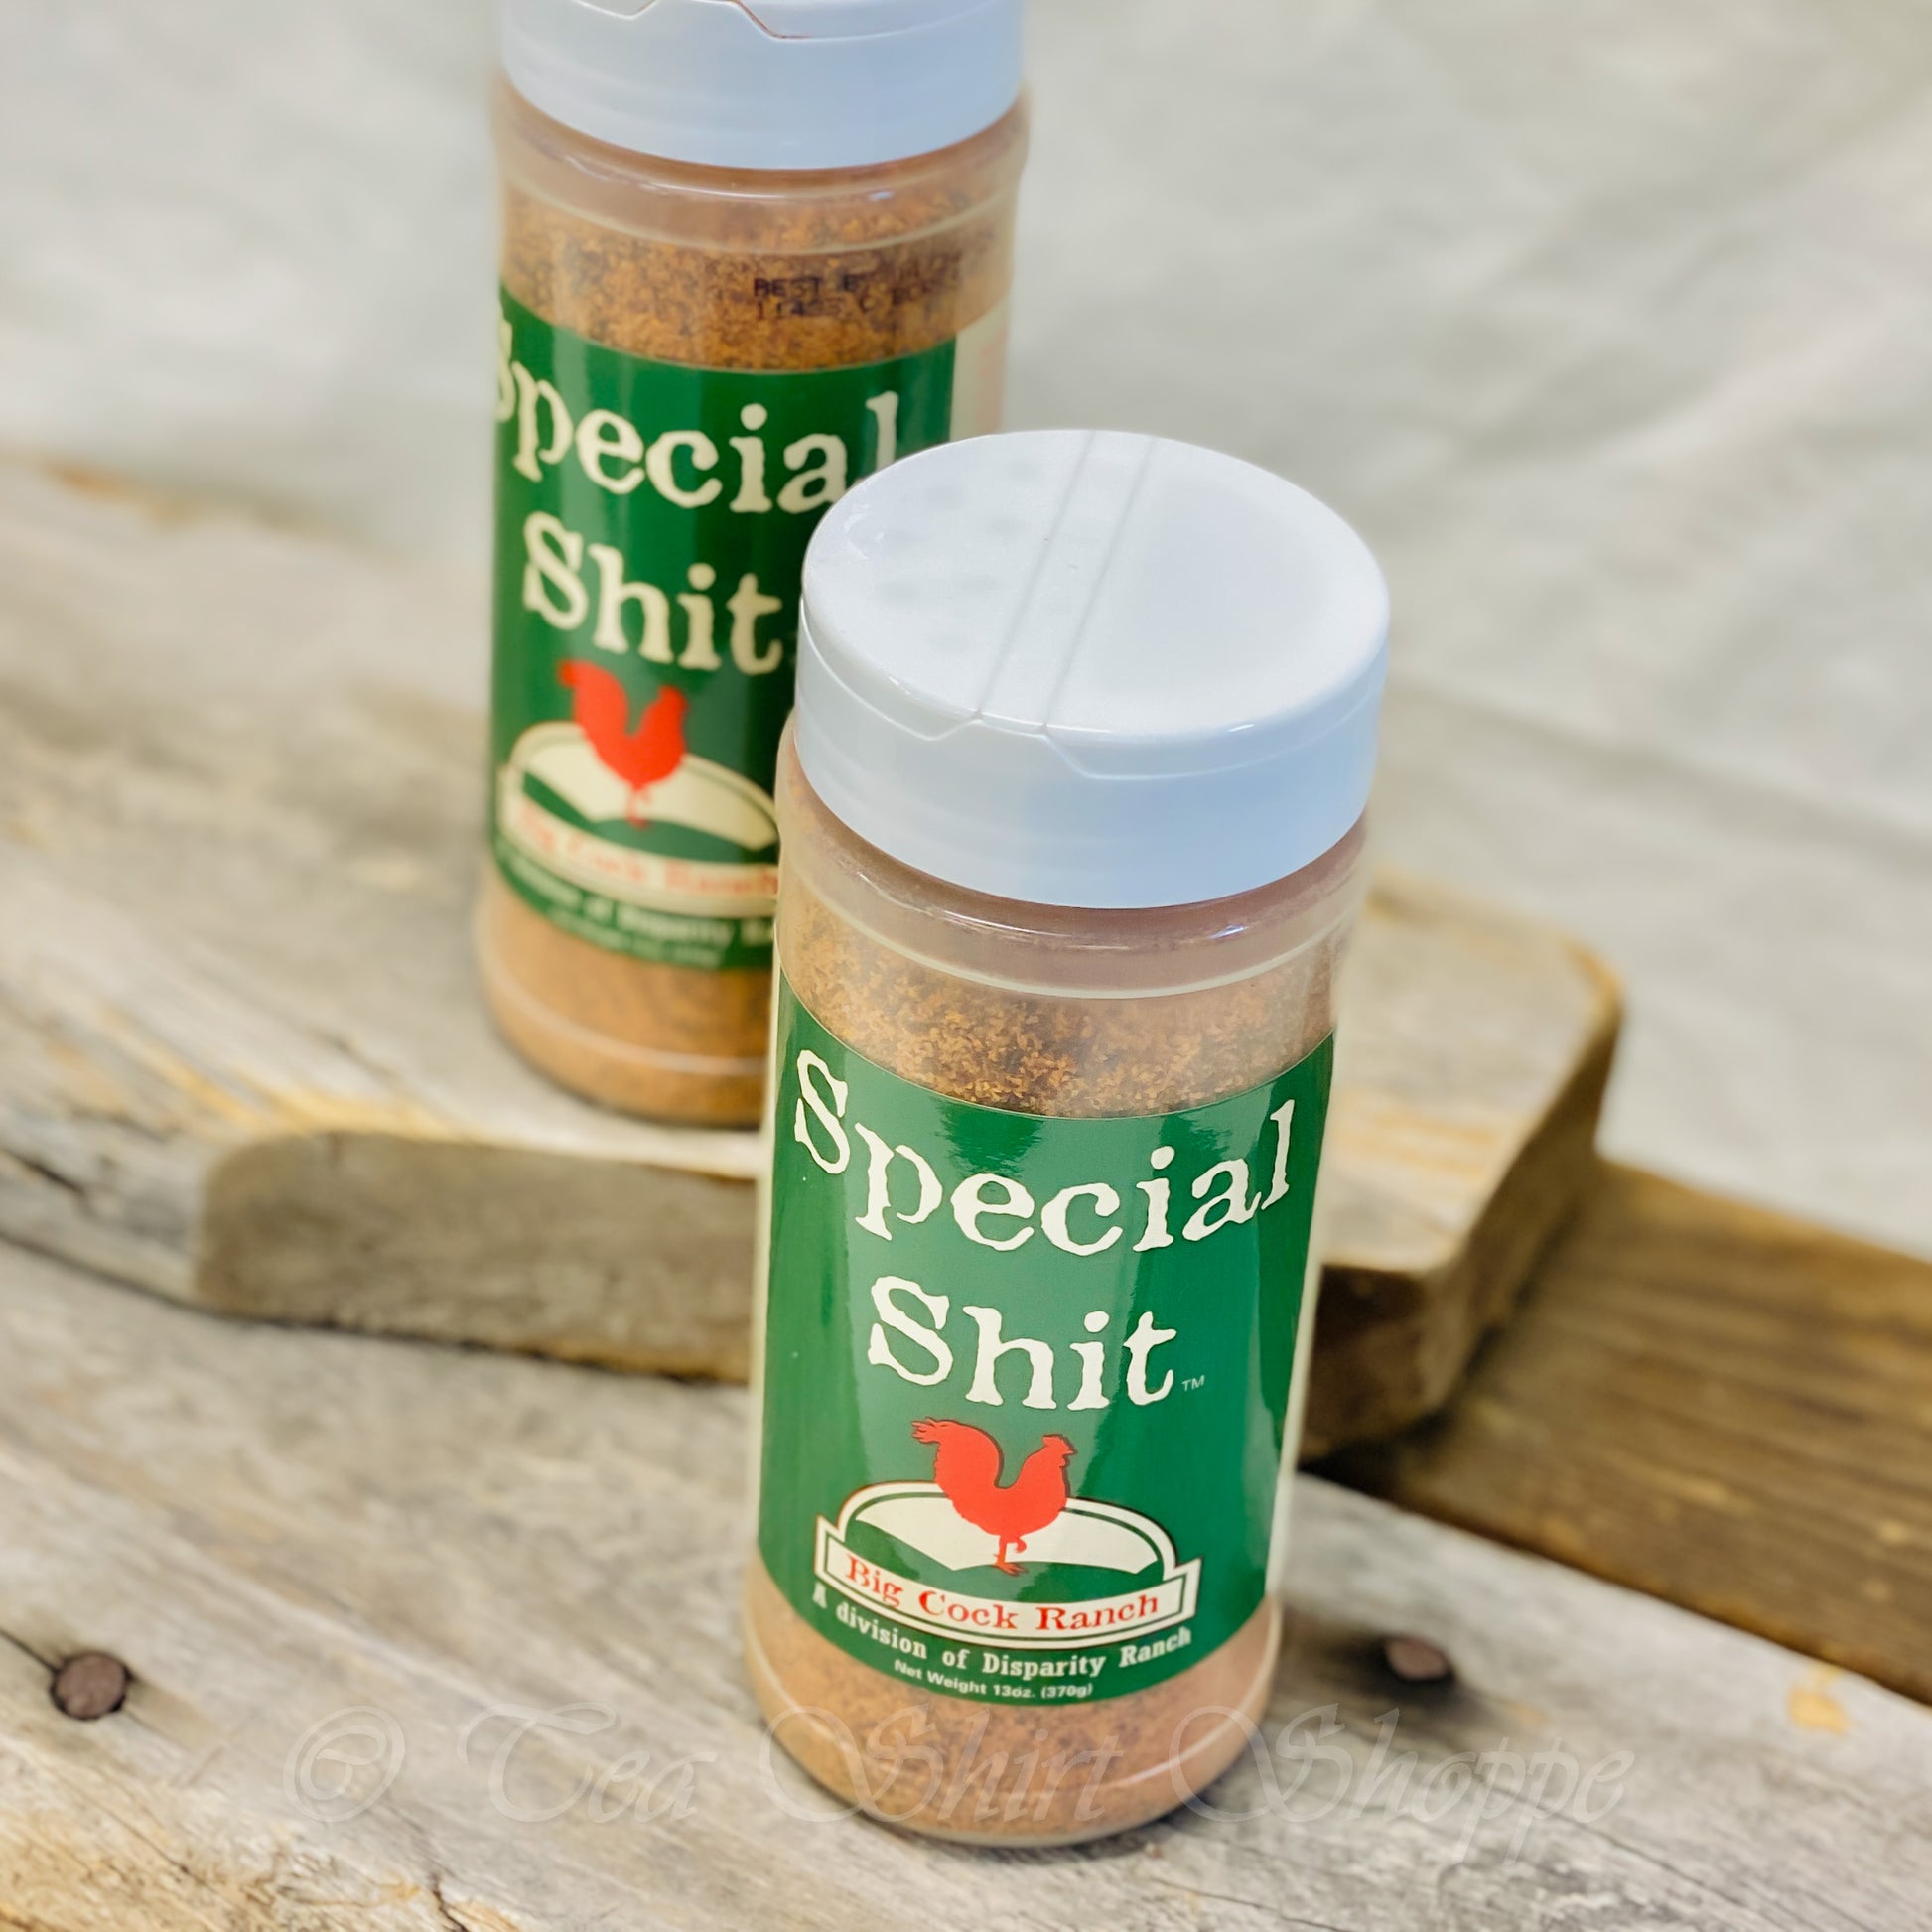 For a real BBQ treat, fire up your grill and use our secret spice blend for grilling and barbeque. You’ll have delectable steaks, chicken, seafood, pork, potatoes, and veggies!